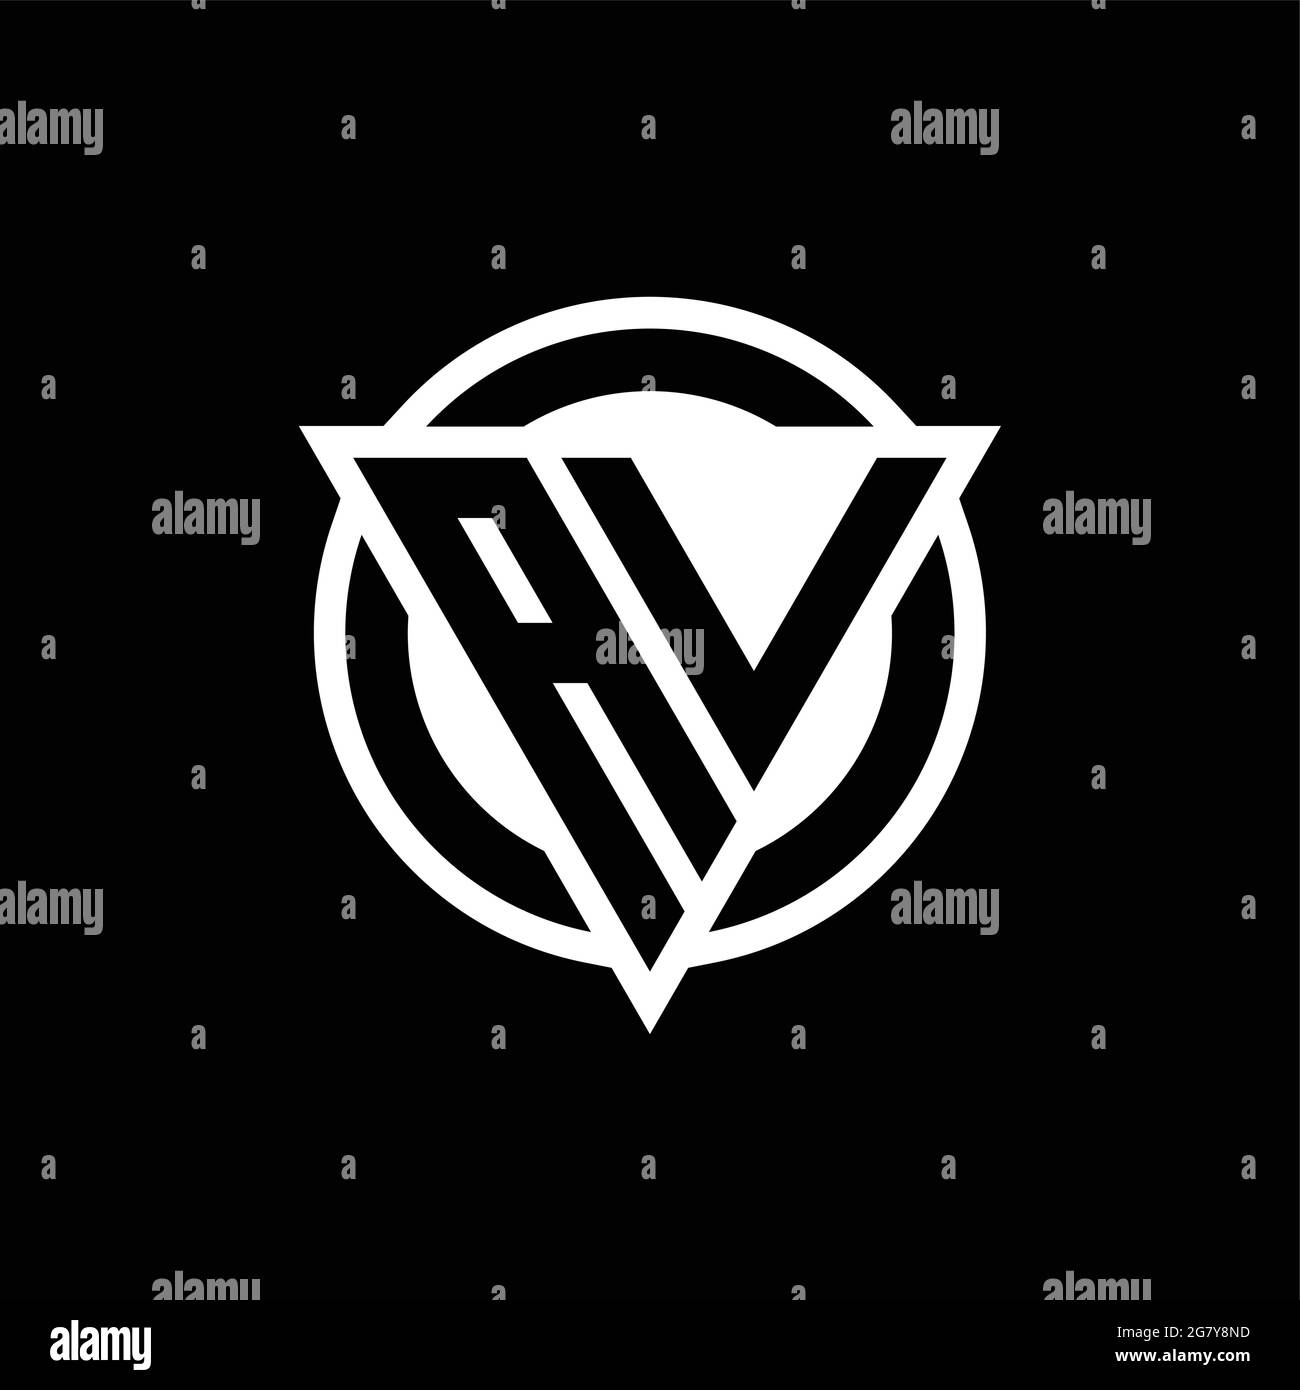 AV logo with negative space triangle shape and circle rounded design template isolated on black background Stock Vector